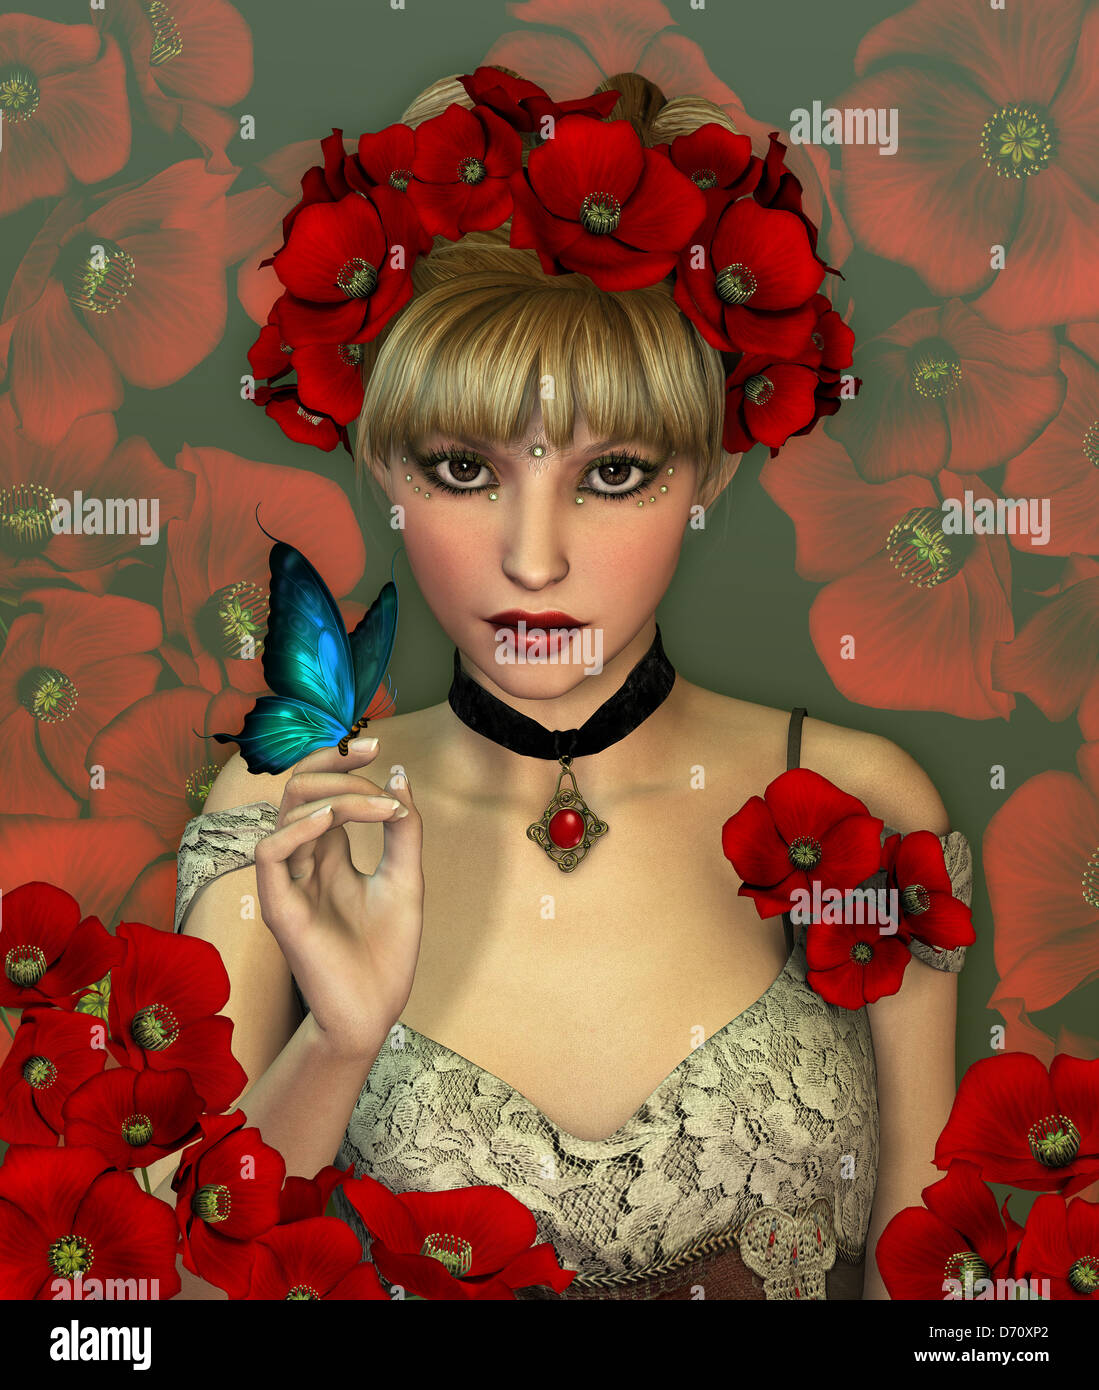 Portrait of a Girl with red Poppies in her Hair Stock Photo